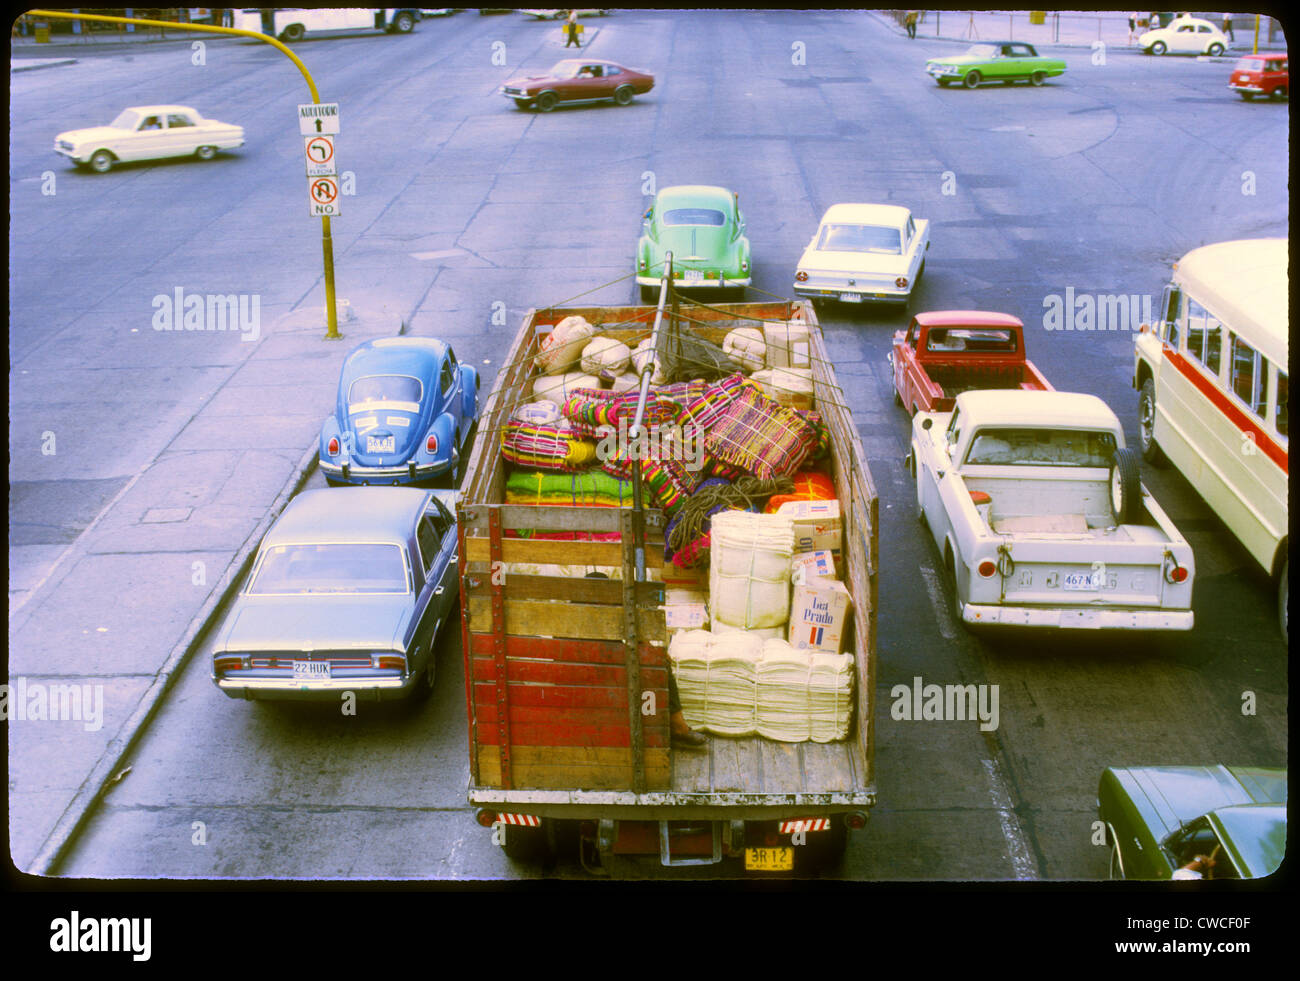 truck in parking lot loaded with hand made blankets and other goods guadalajara, mexico 1973 colorful city scape traffice VWs ca Stock Photo